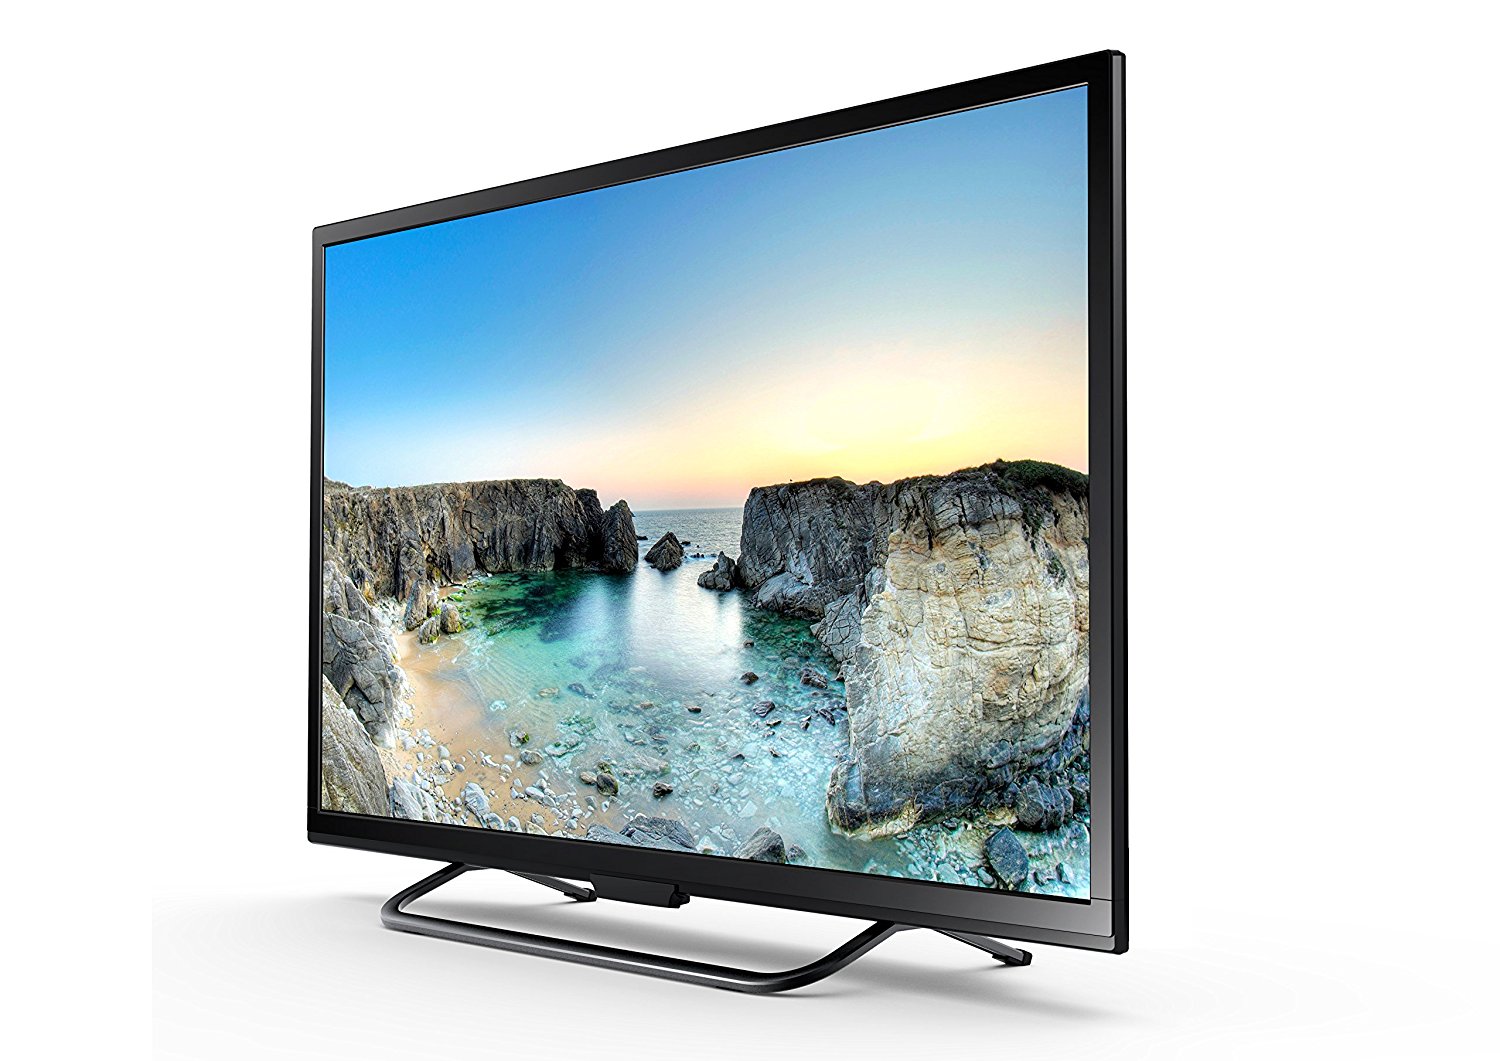 Element Tv Review 2020 Things You Should Know Before Buying One Tv Review Land